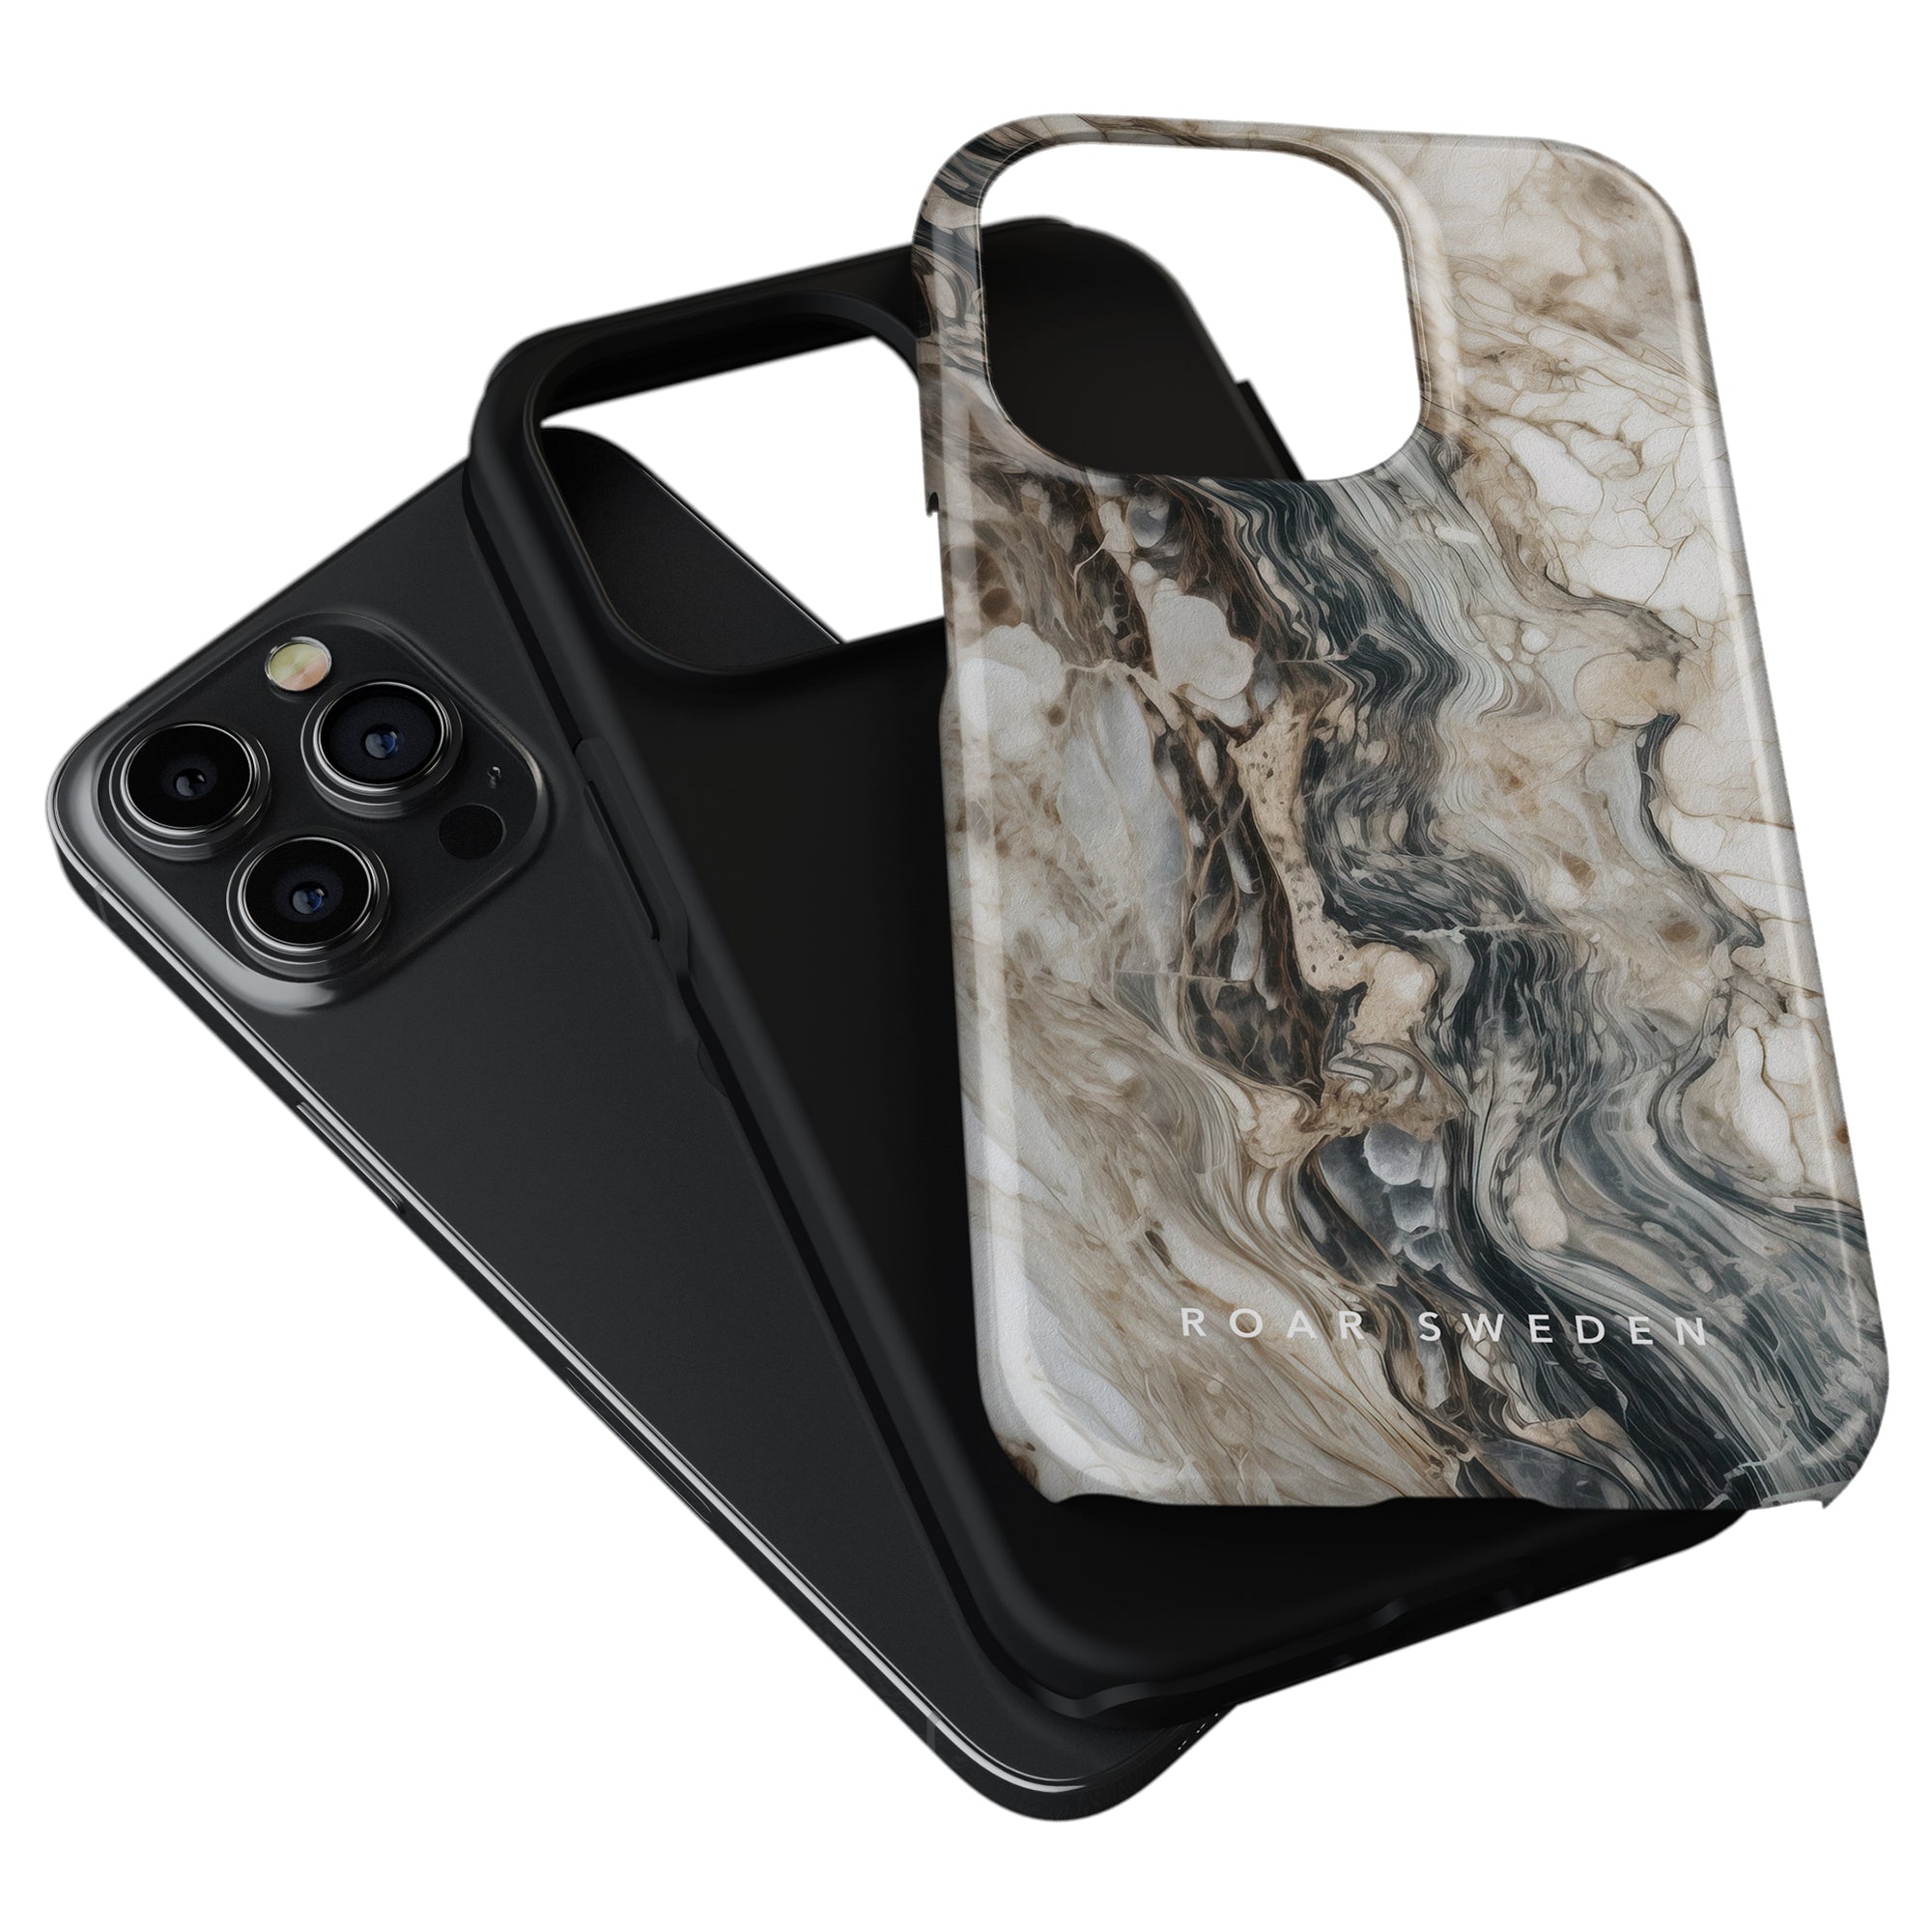 Two phone cases, one black and one with a marble-like pattern from the Ocean-kollektion, lay on top of a smartphone with a triple camera setup. "Napoleon - Tough Case" is written on the marbled case, ensuring both style and robust skydd for your device.